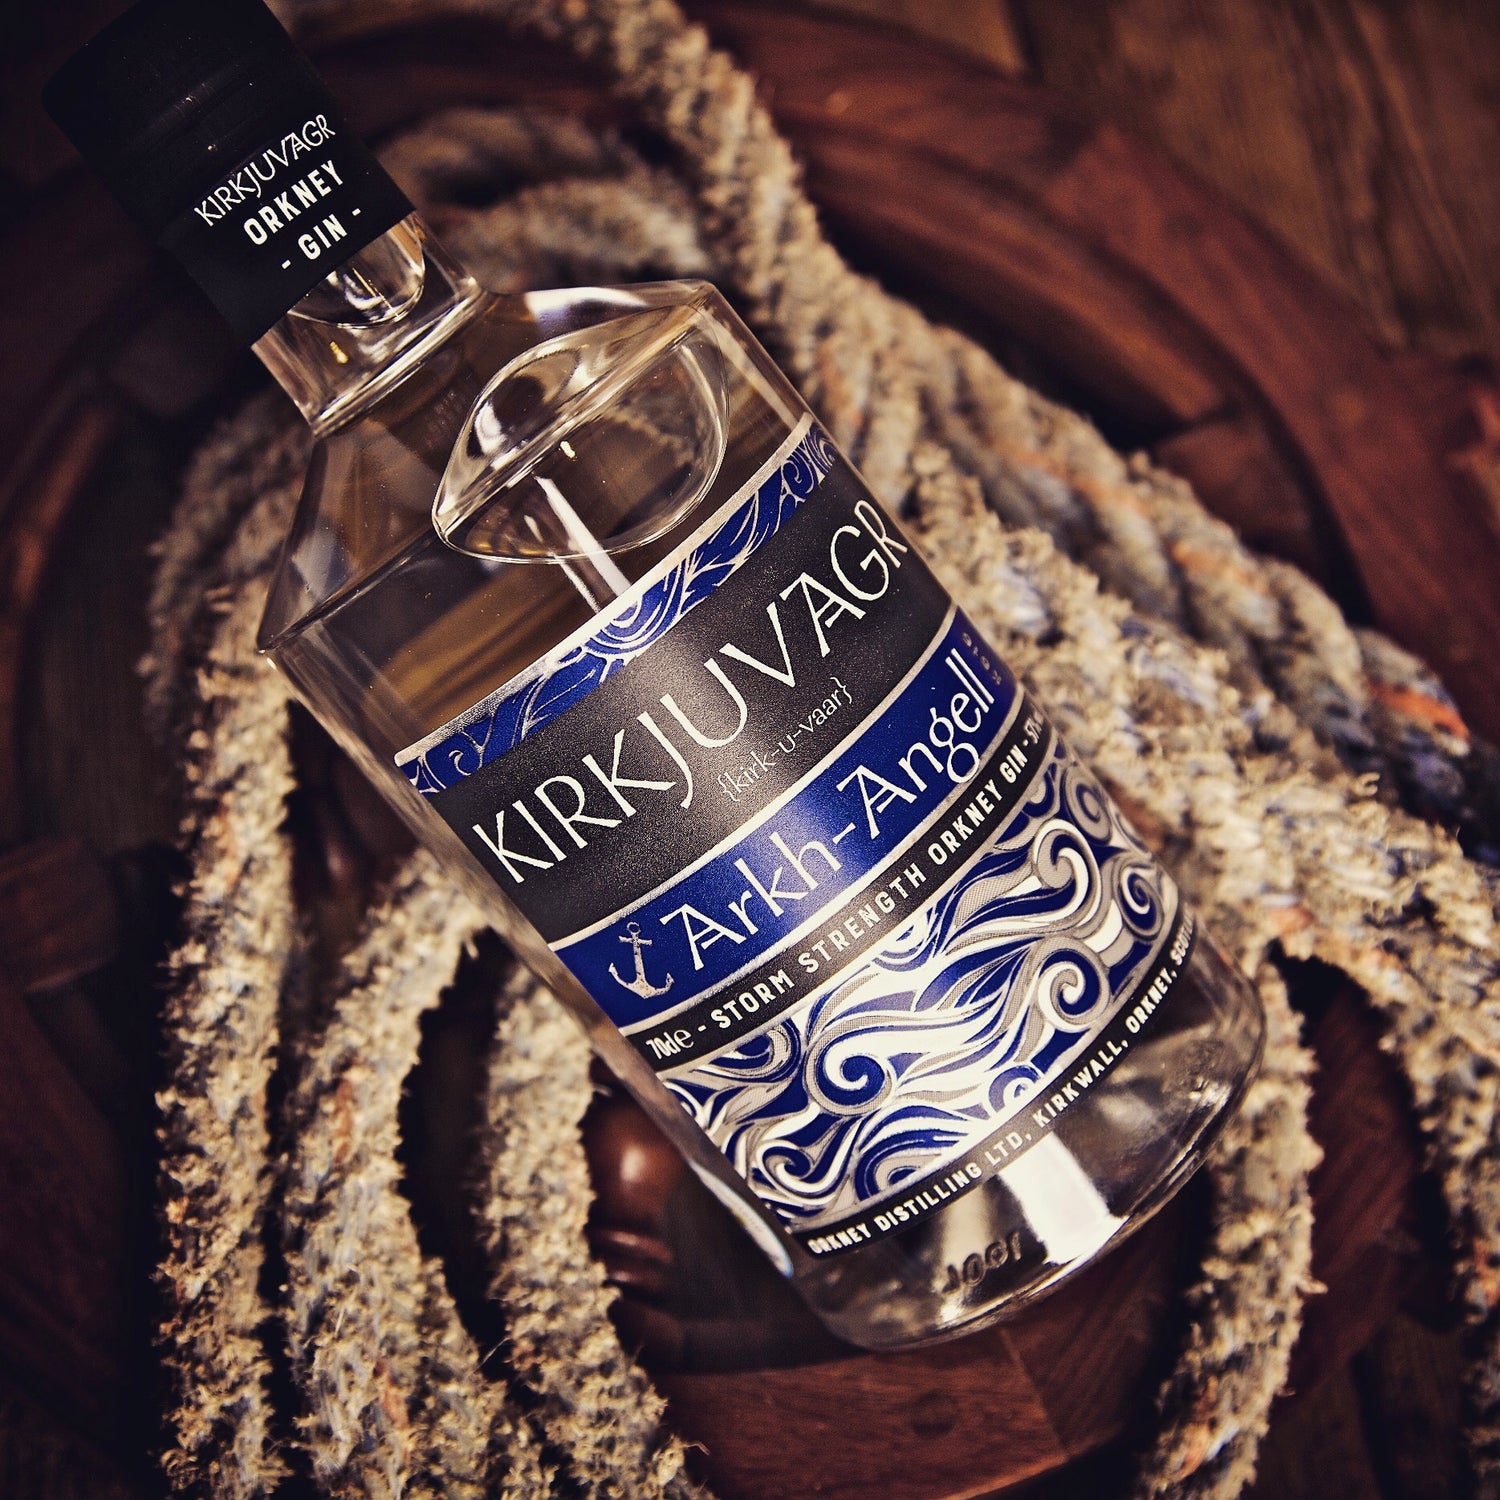 Orkney Distilling Double Finalists in Scottish Gin Awards!